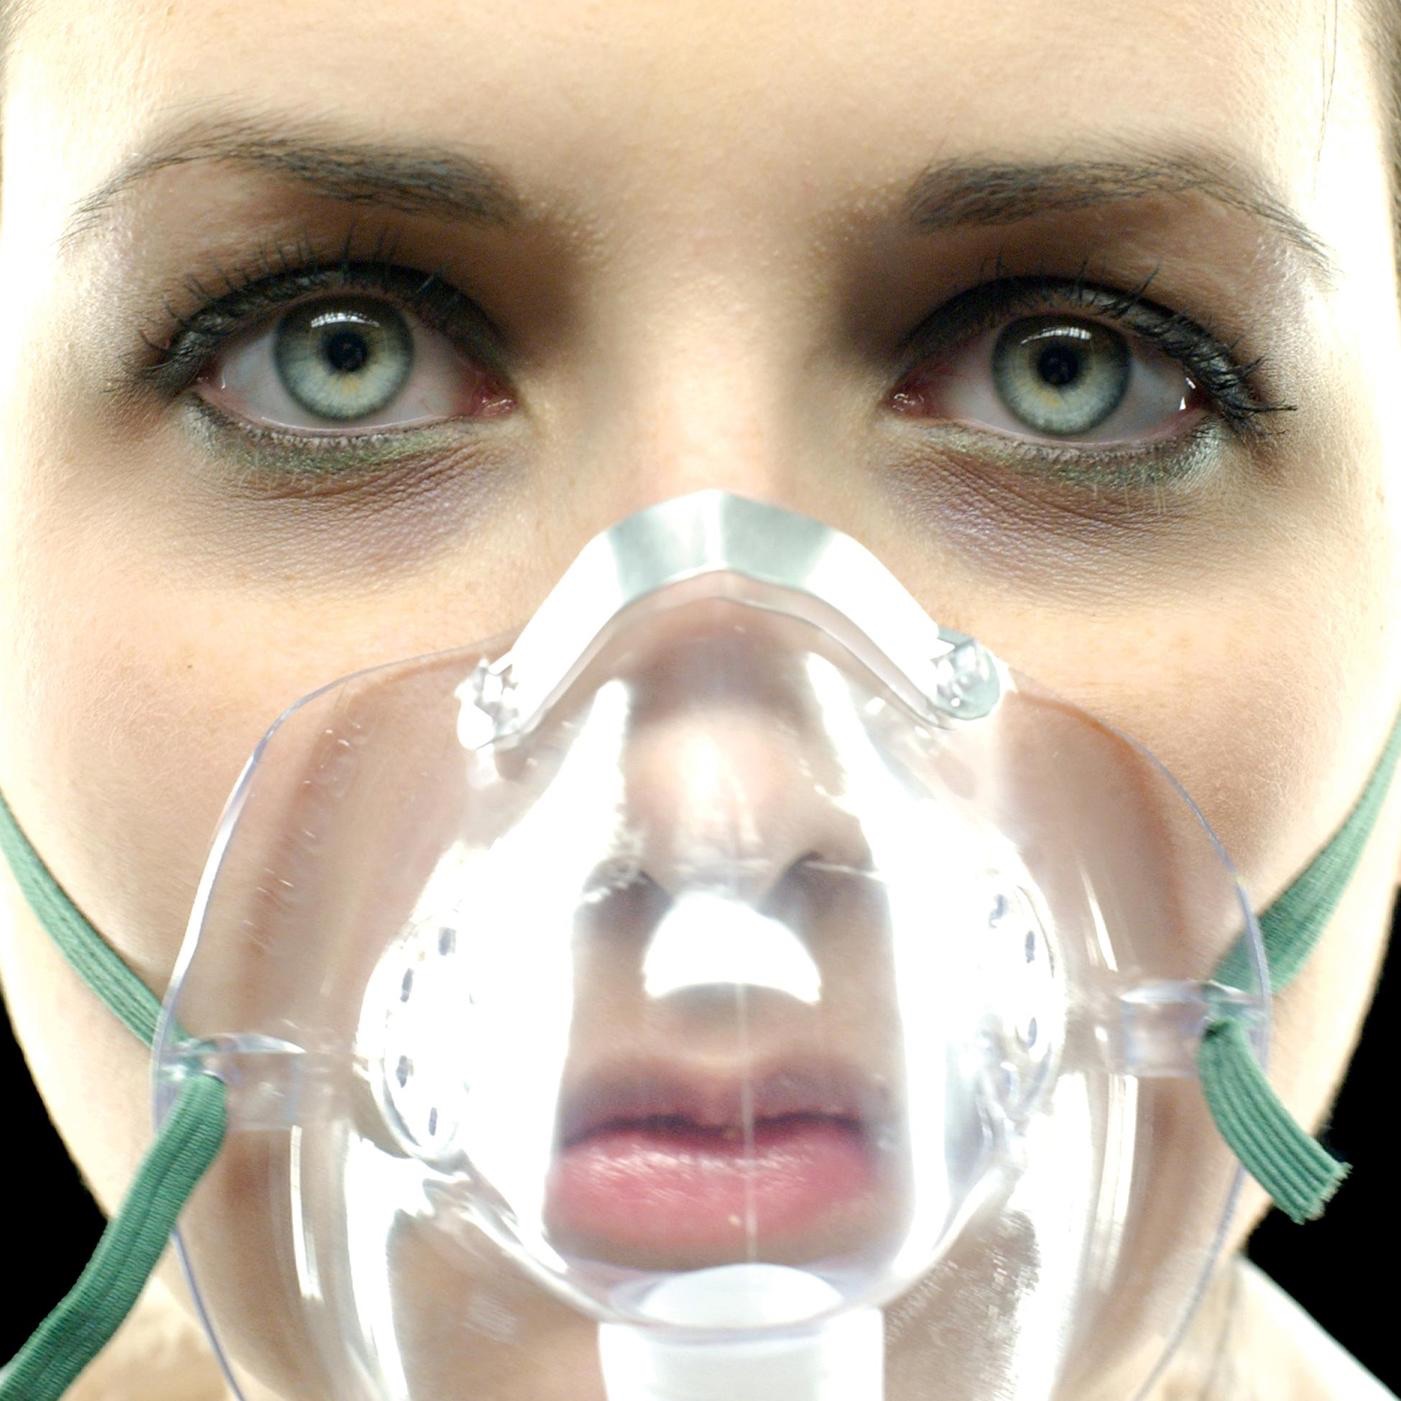 Underoath they re only chasing safety special edition torrent